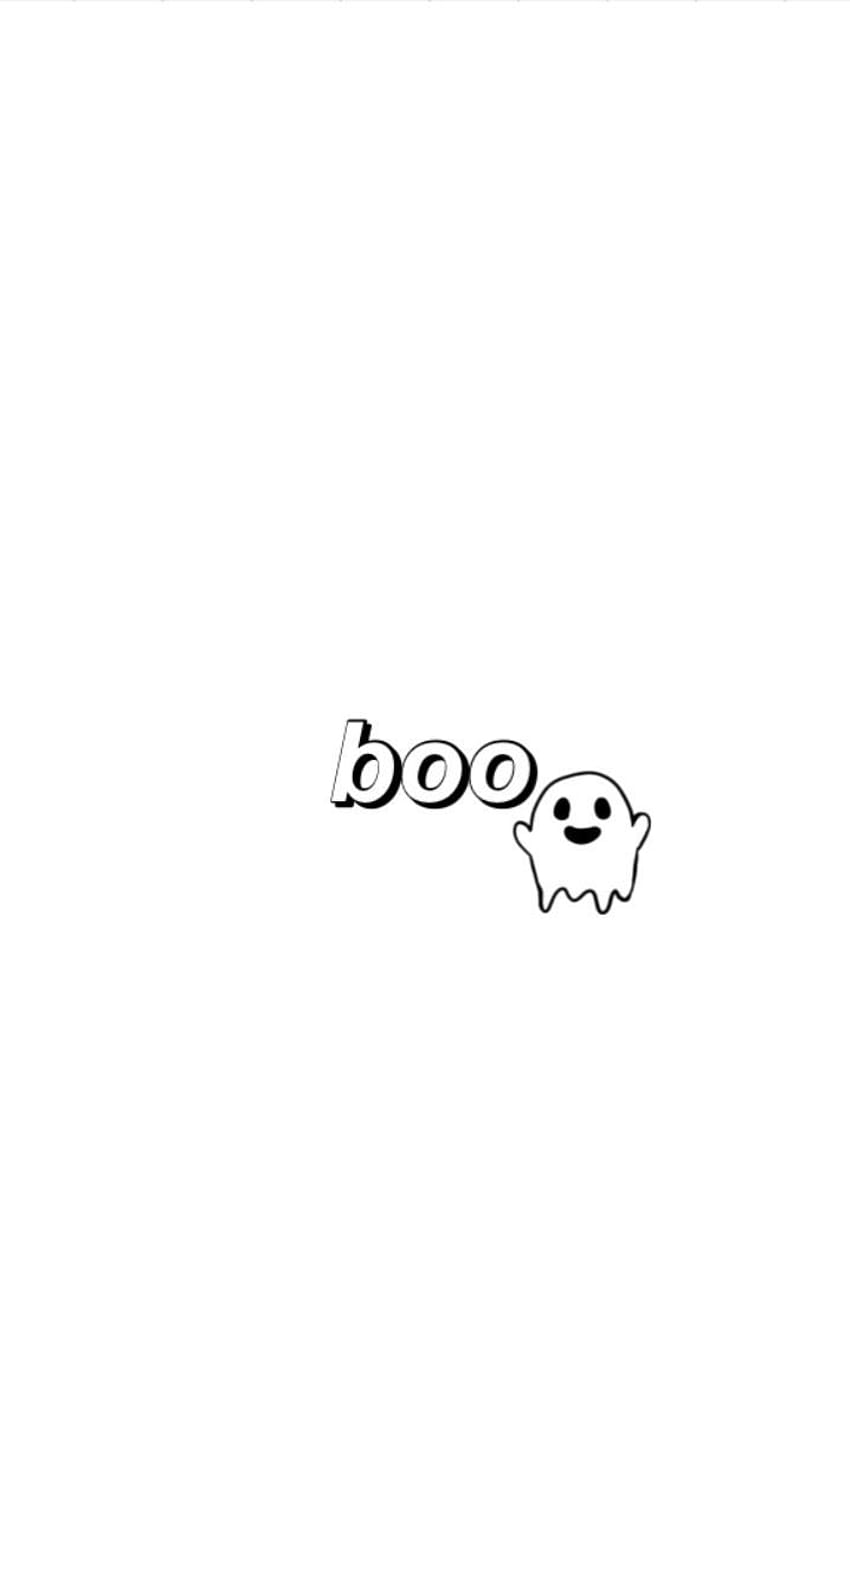 A black and white image of the word boo - Cute Halloween